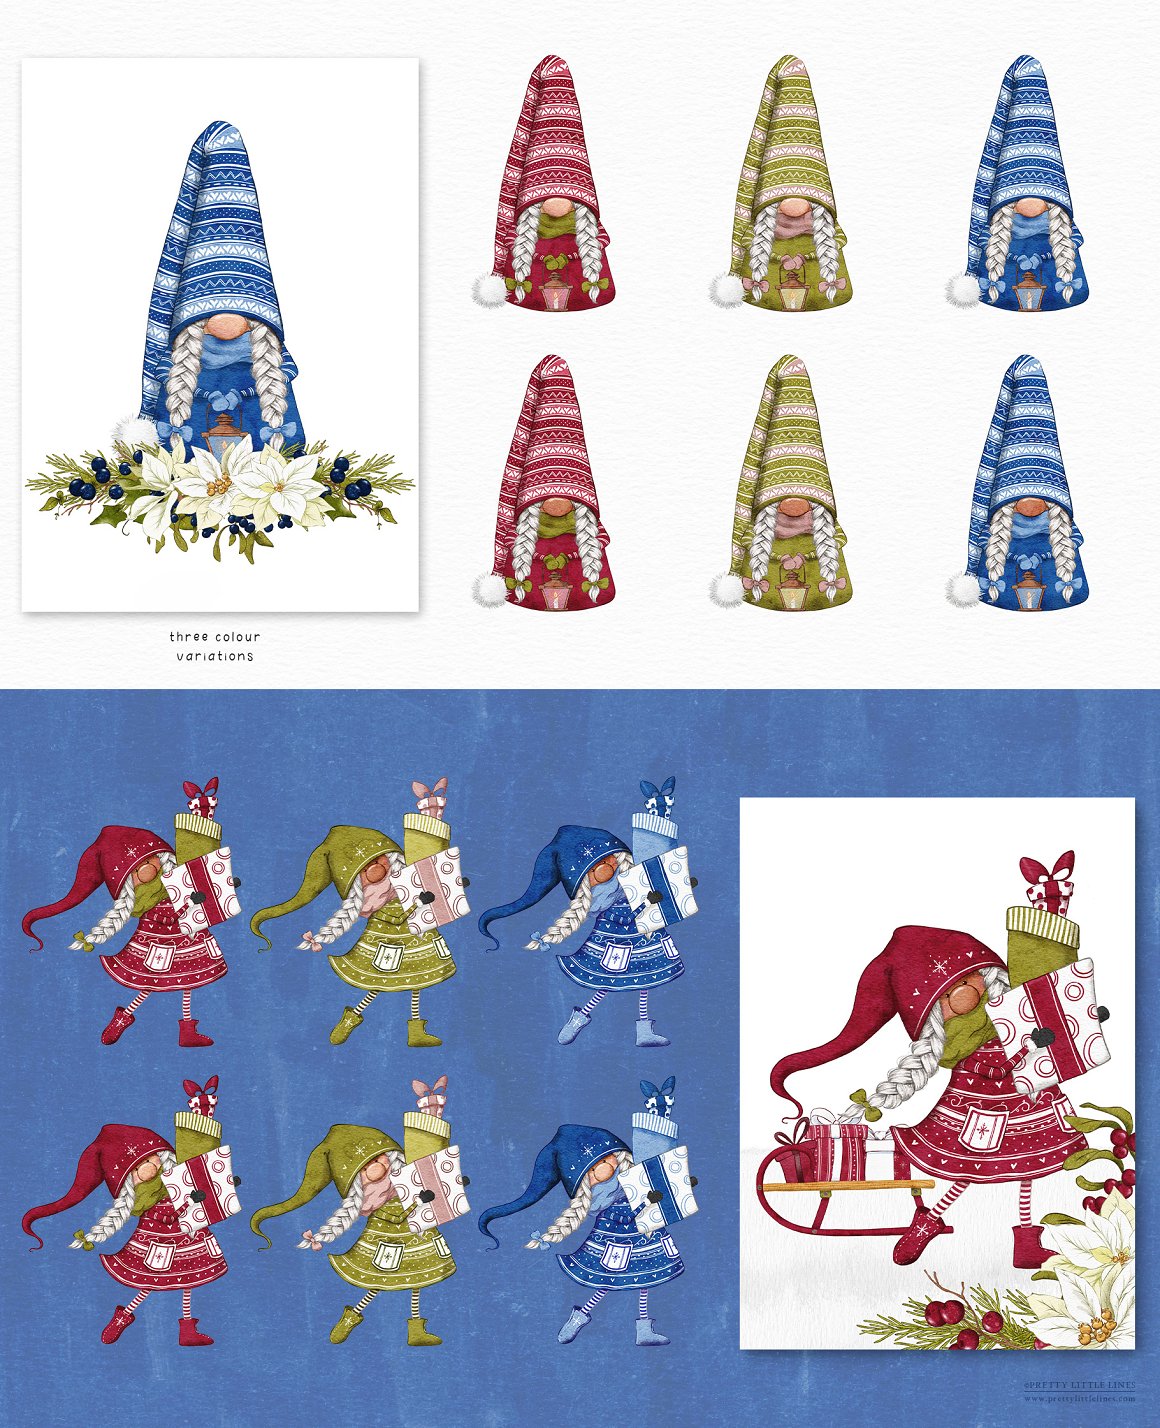 Great images for the theme of the gnomes of the merry-go-rounds.